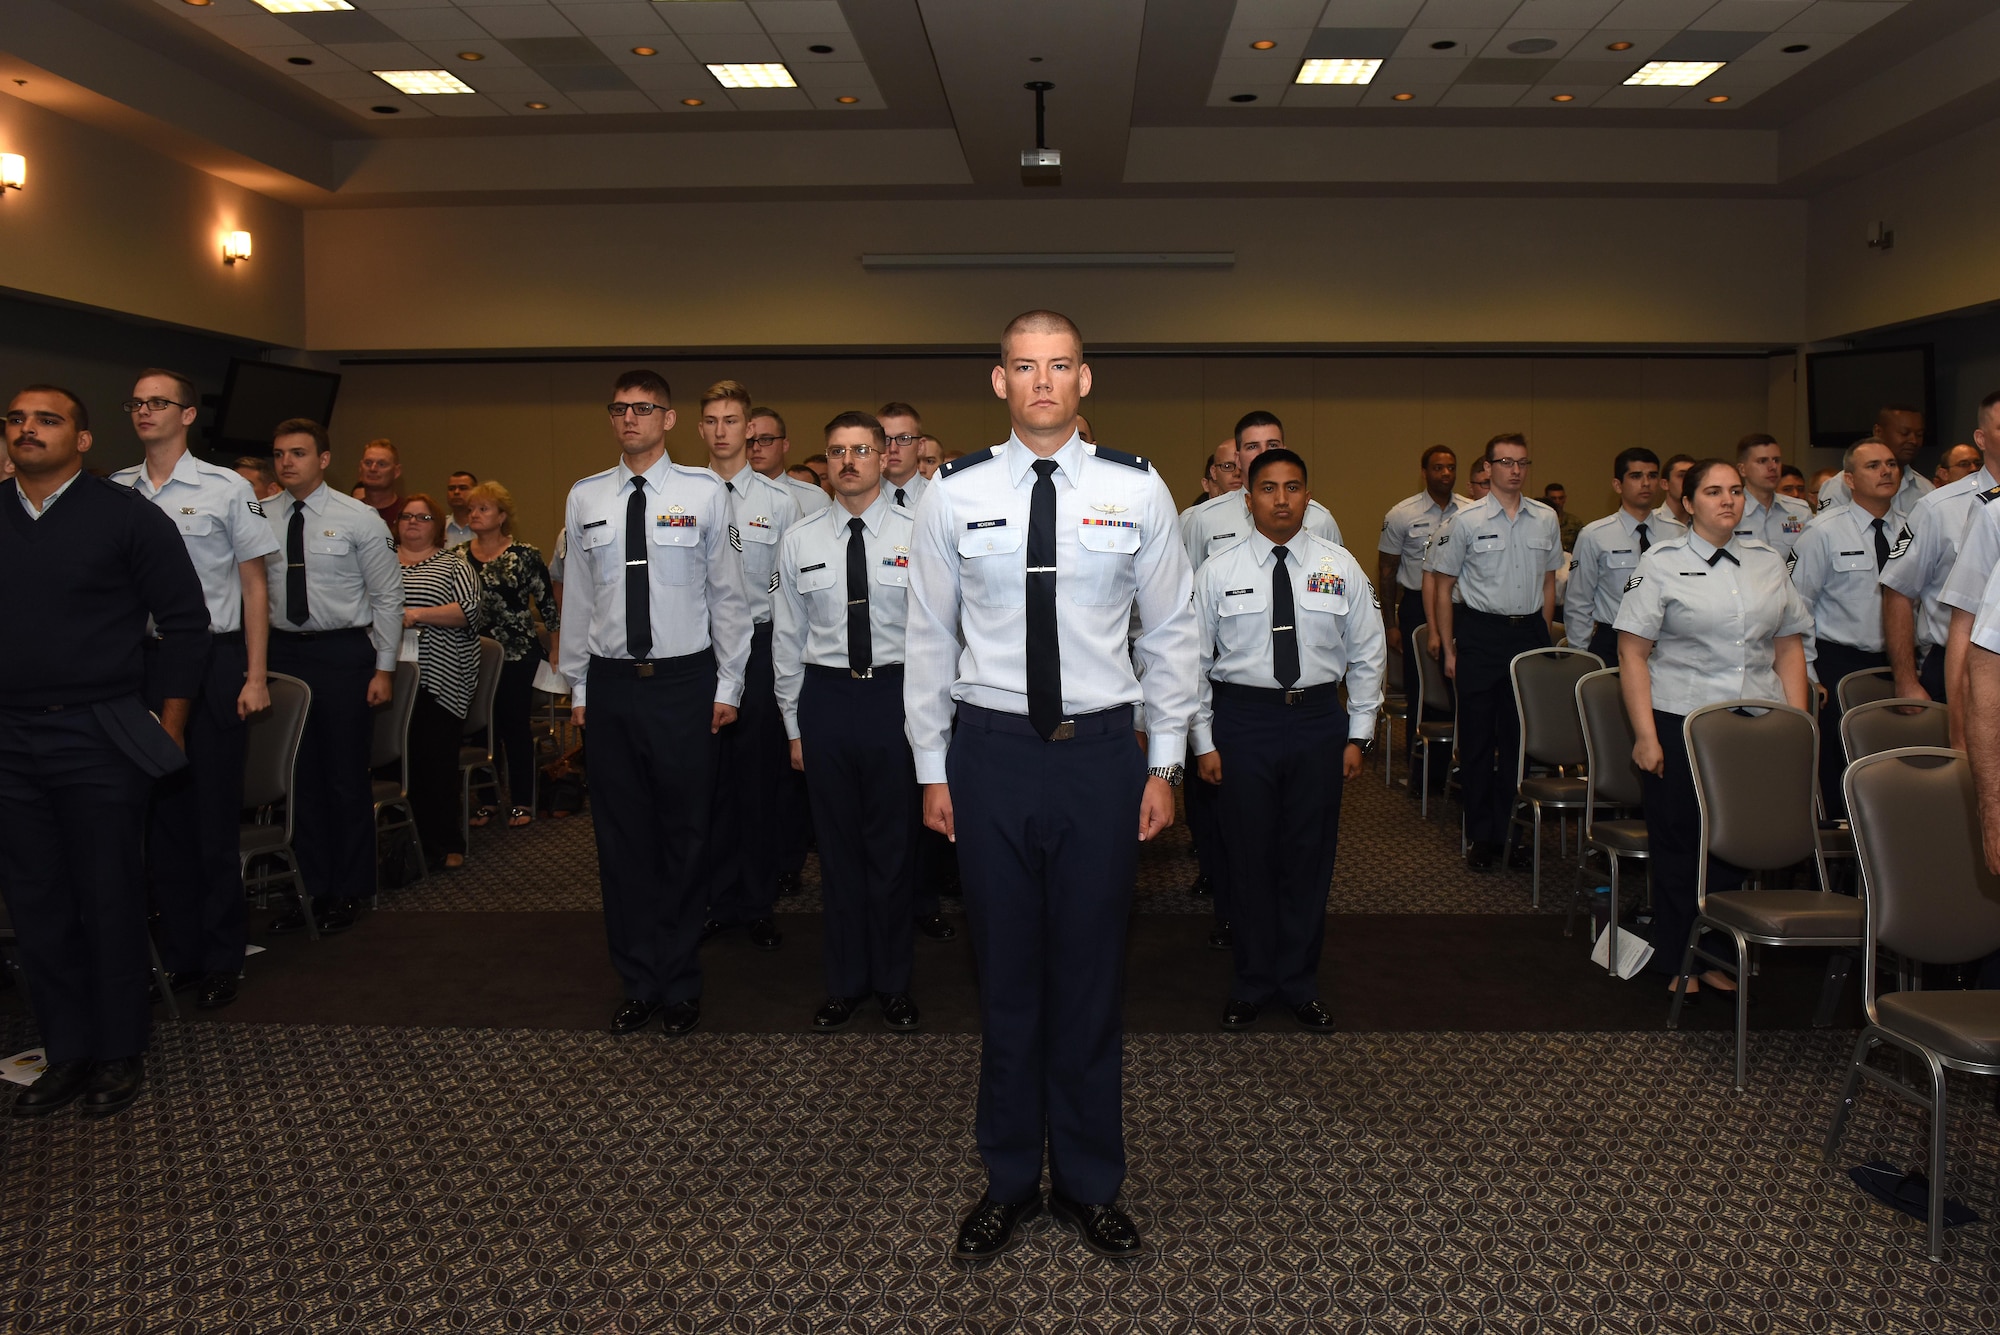 17th Communications Squadron stands at attention in respect of their departing and incoming commanders during the 17th CS Change of Command ceremony at the Event Center on Goodfellow Air Force Base, Texas, May 31, 2017. During the ceremony the unit would salute the departing and incoming commander. (U.S. Air Force photo by Airman 1st Class Caelynn Ferguson/ Released)